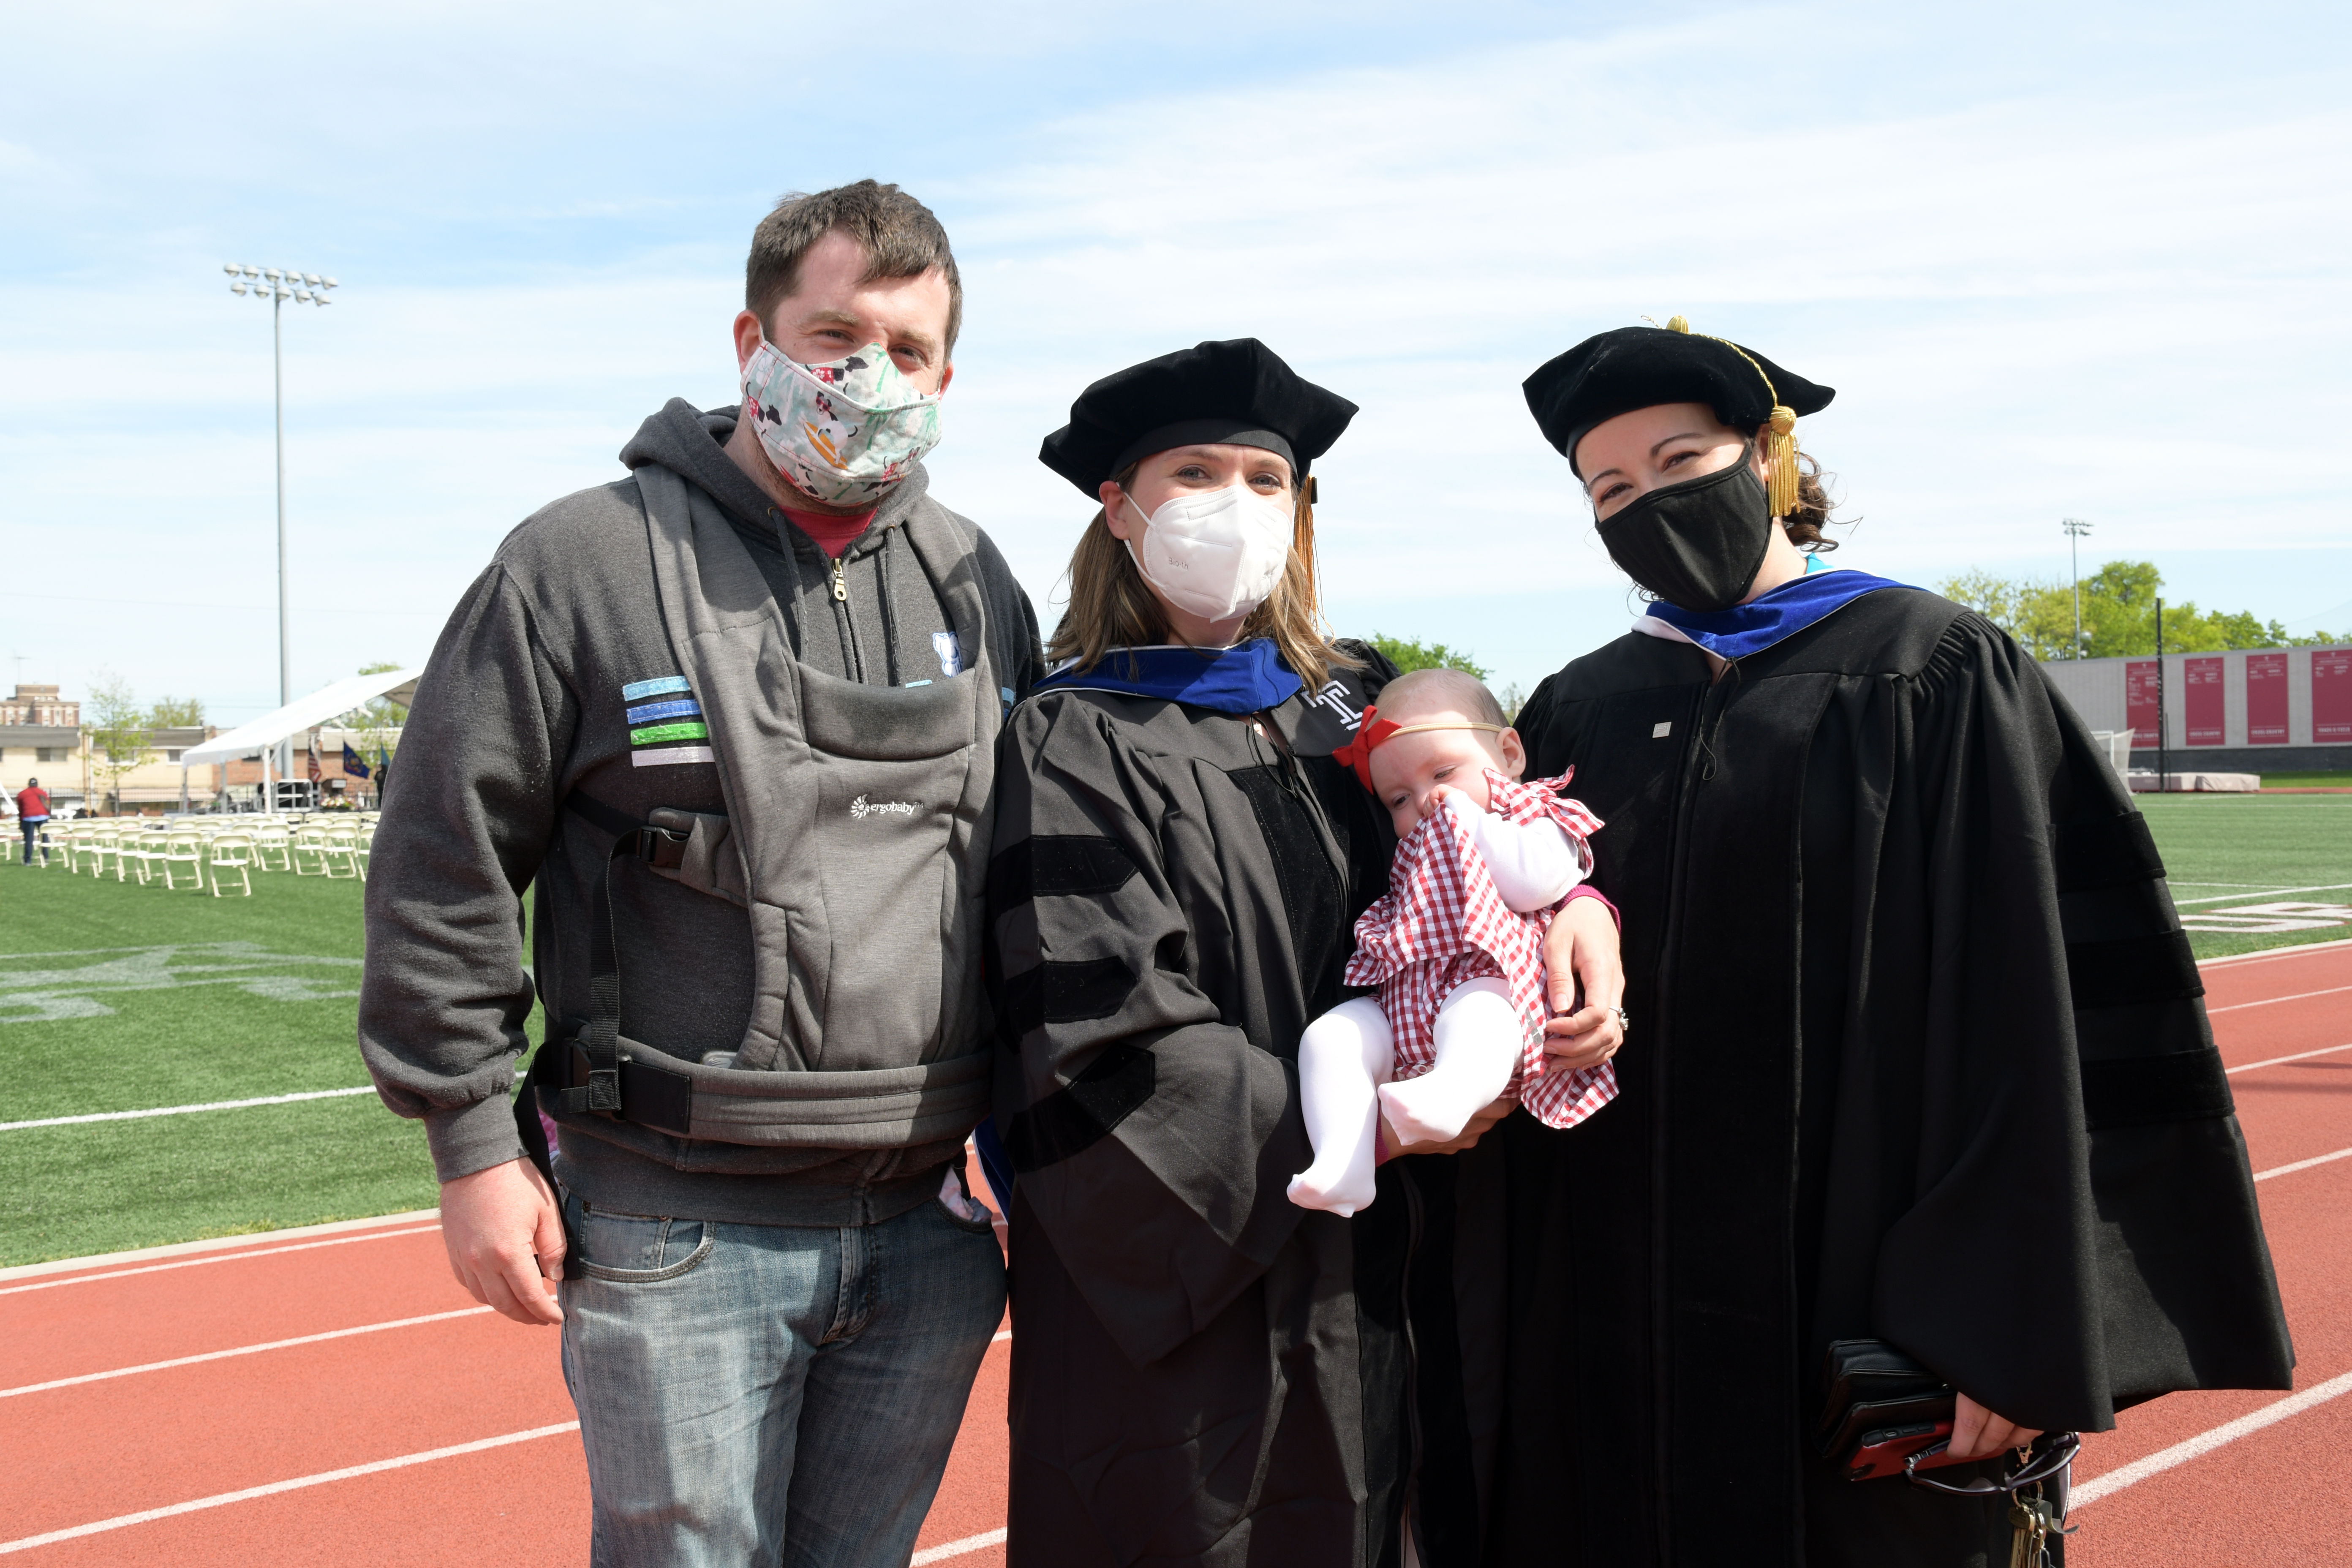 graduate holding a baby poses for photo with professor and family